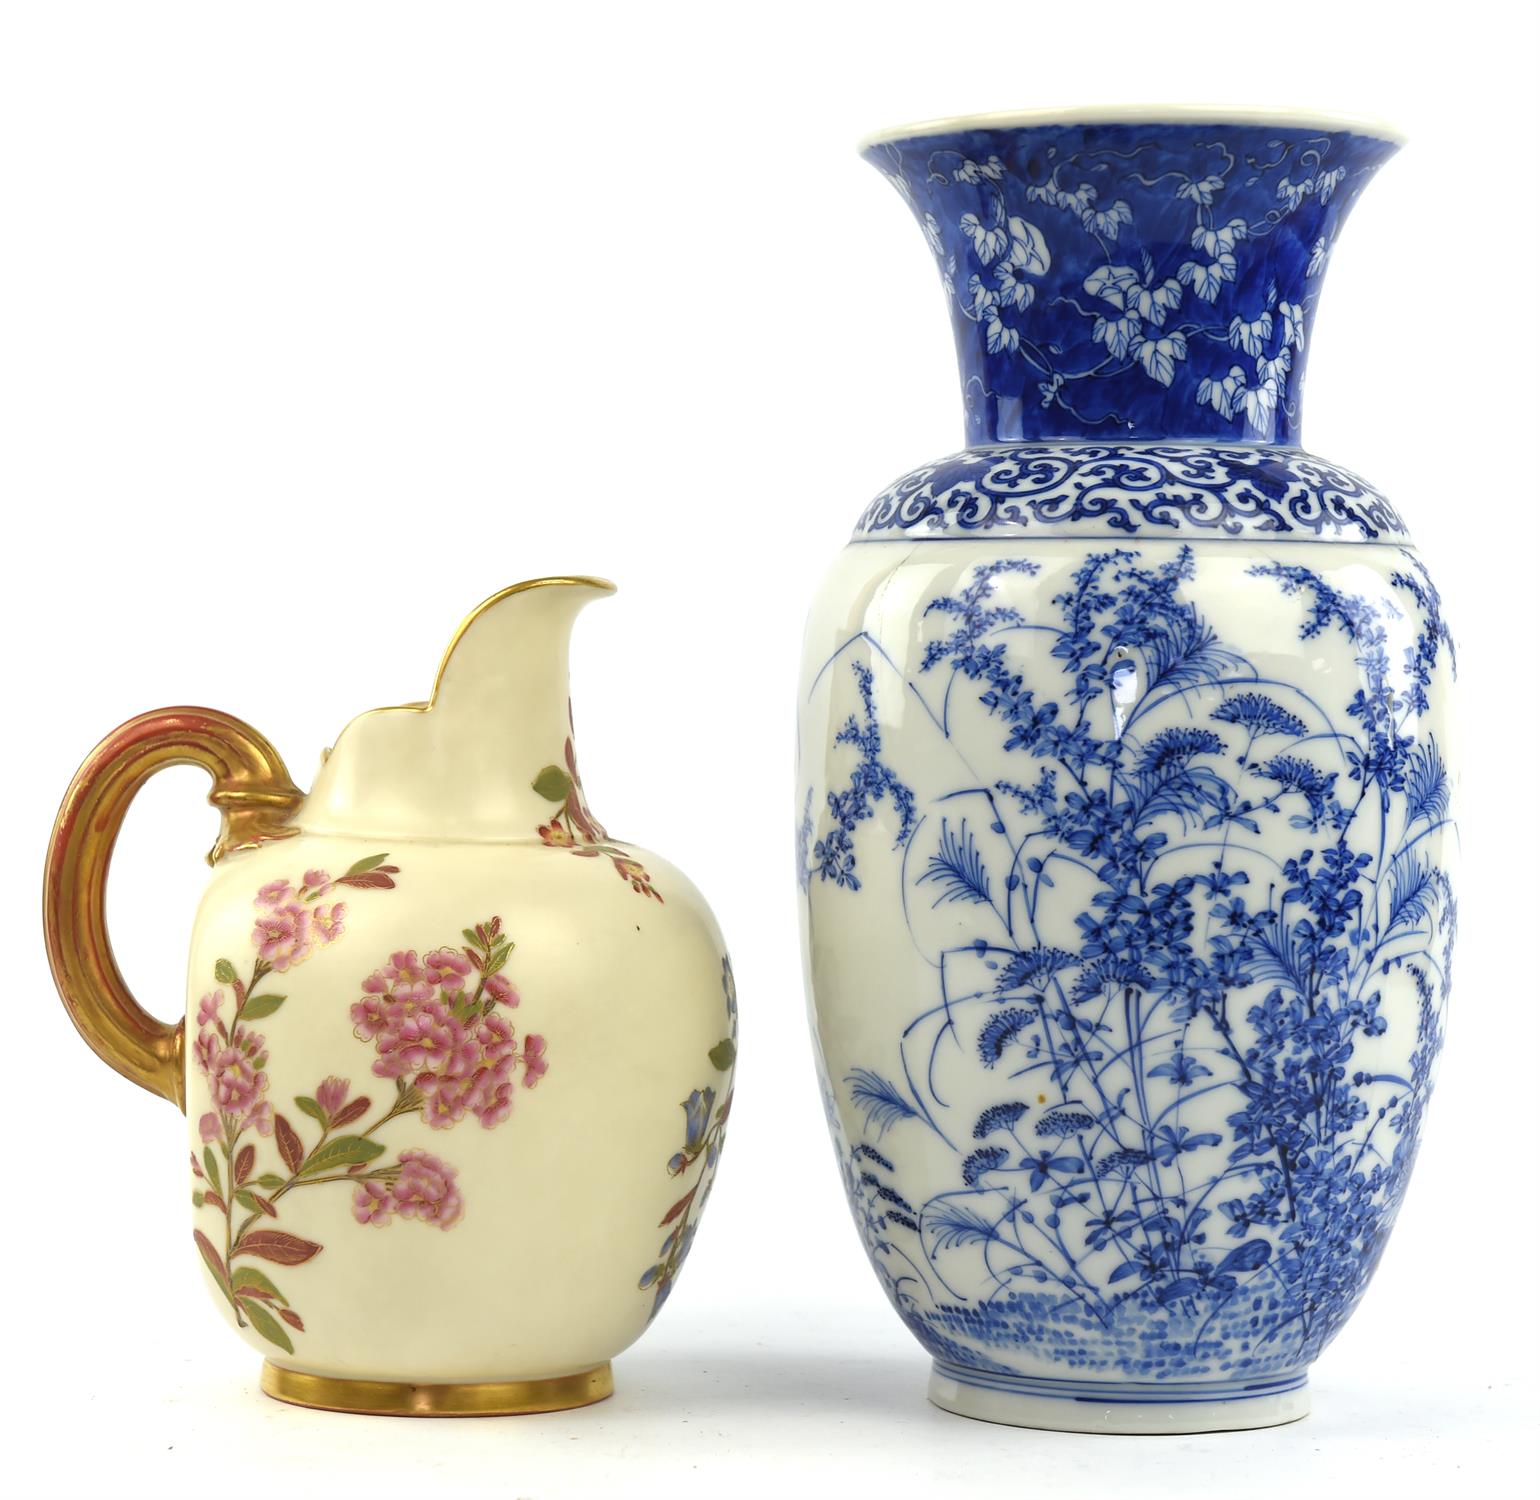 A late 19th century Royal Worcester blush ivory ware jug, height 19cm and a 20th century Japanese